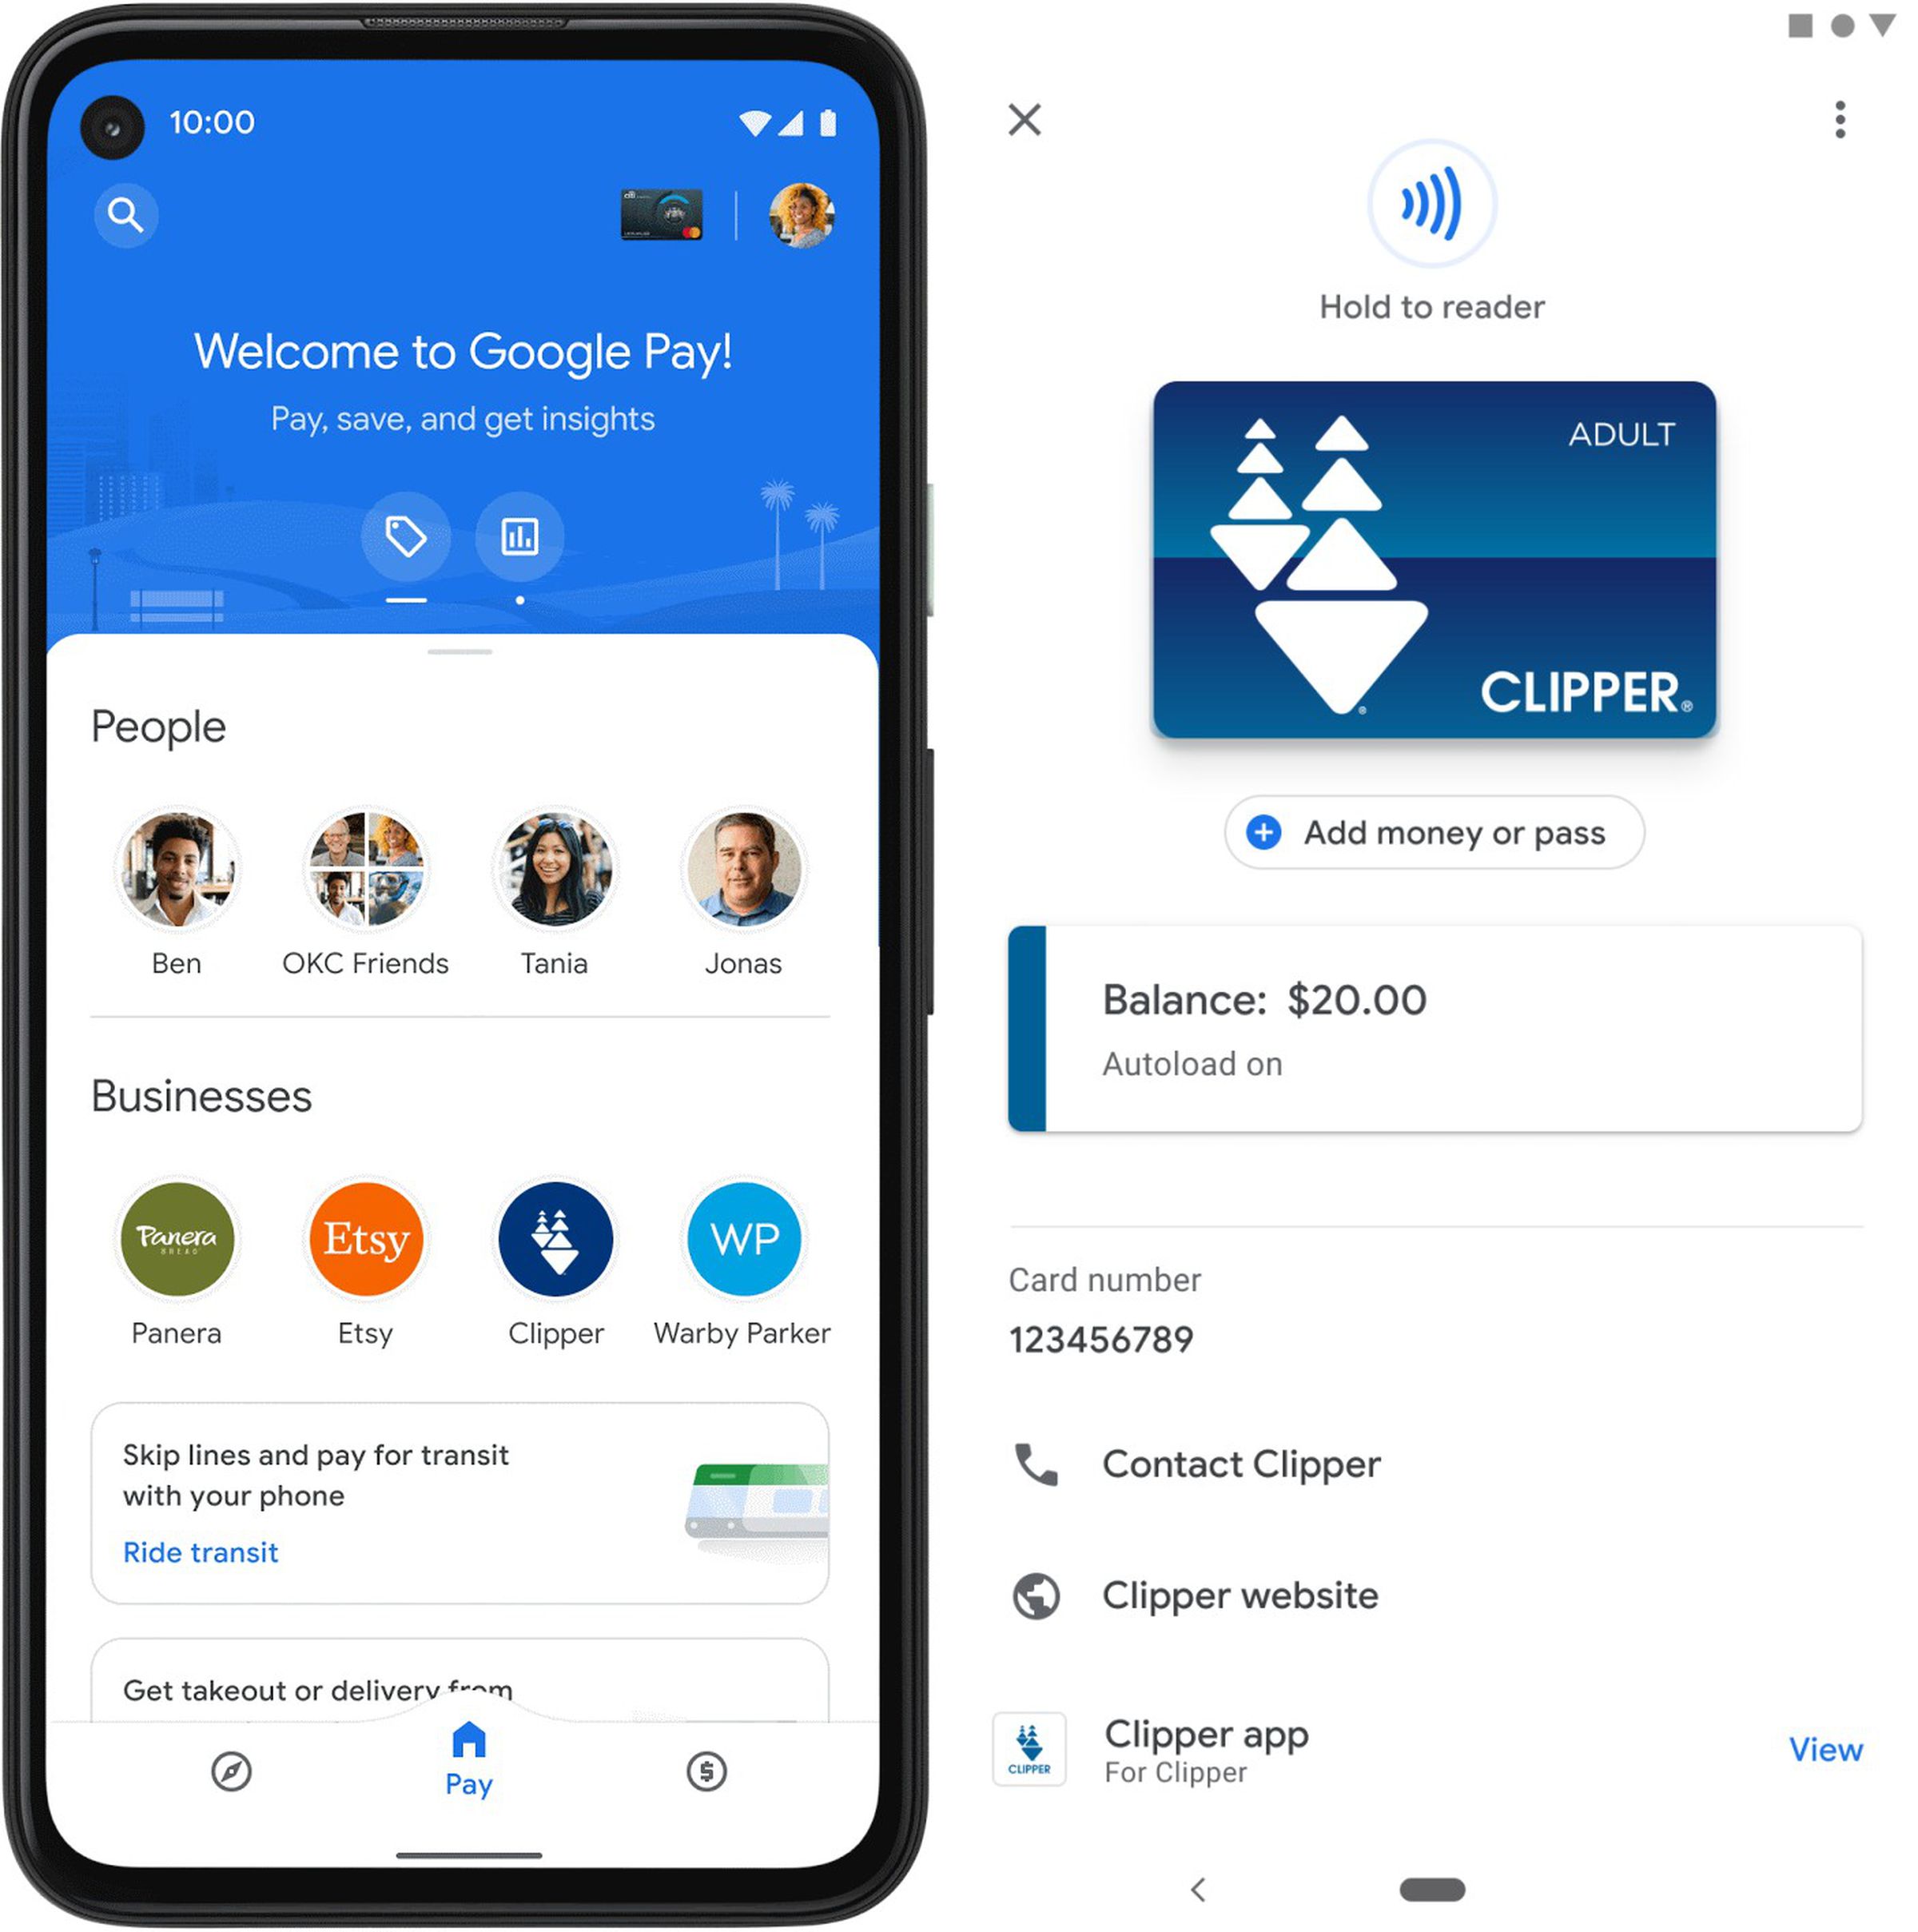 The Clipper card as it appears in Google Pay.